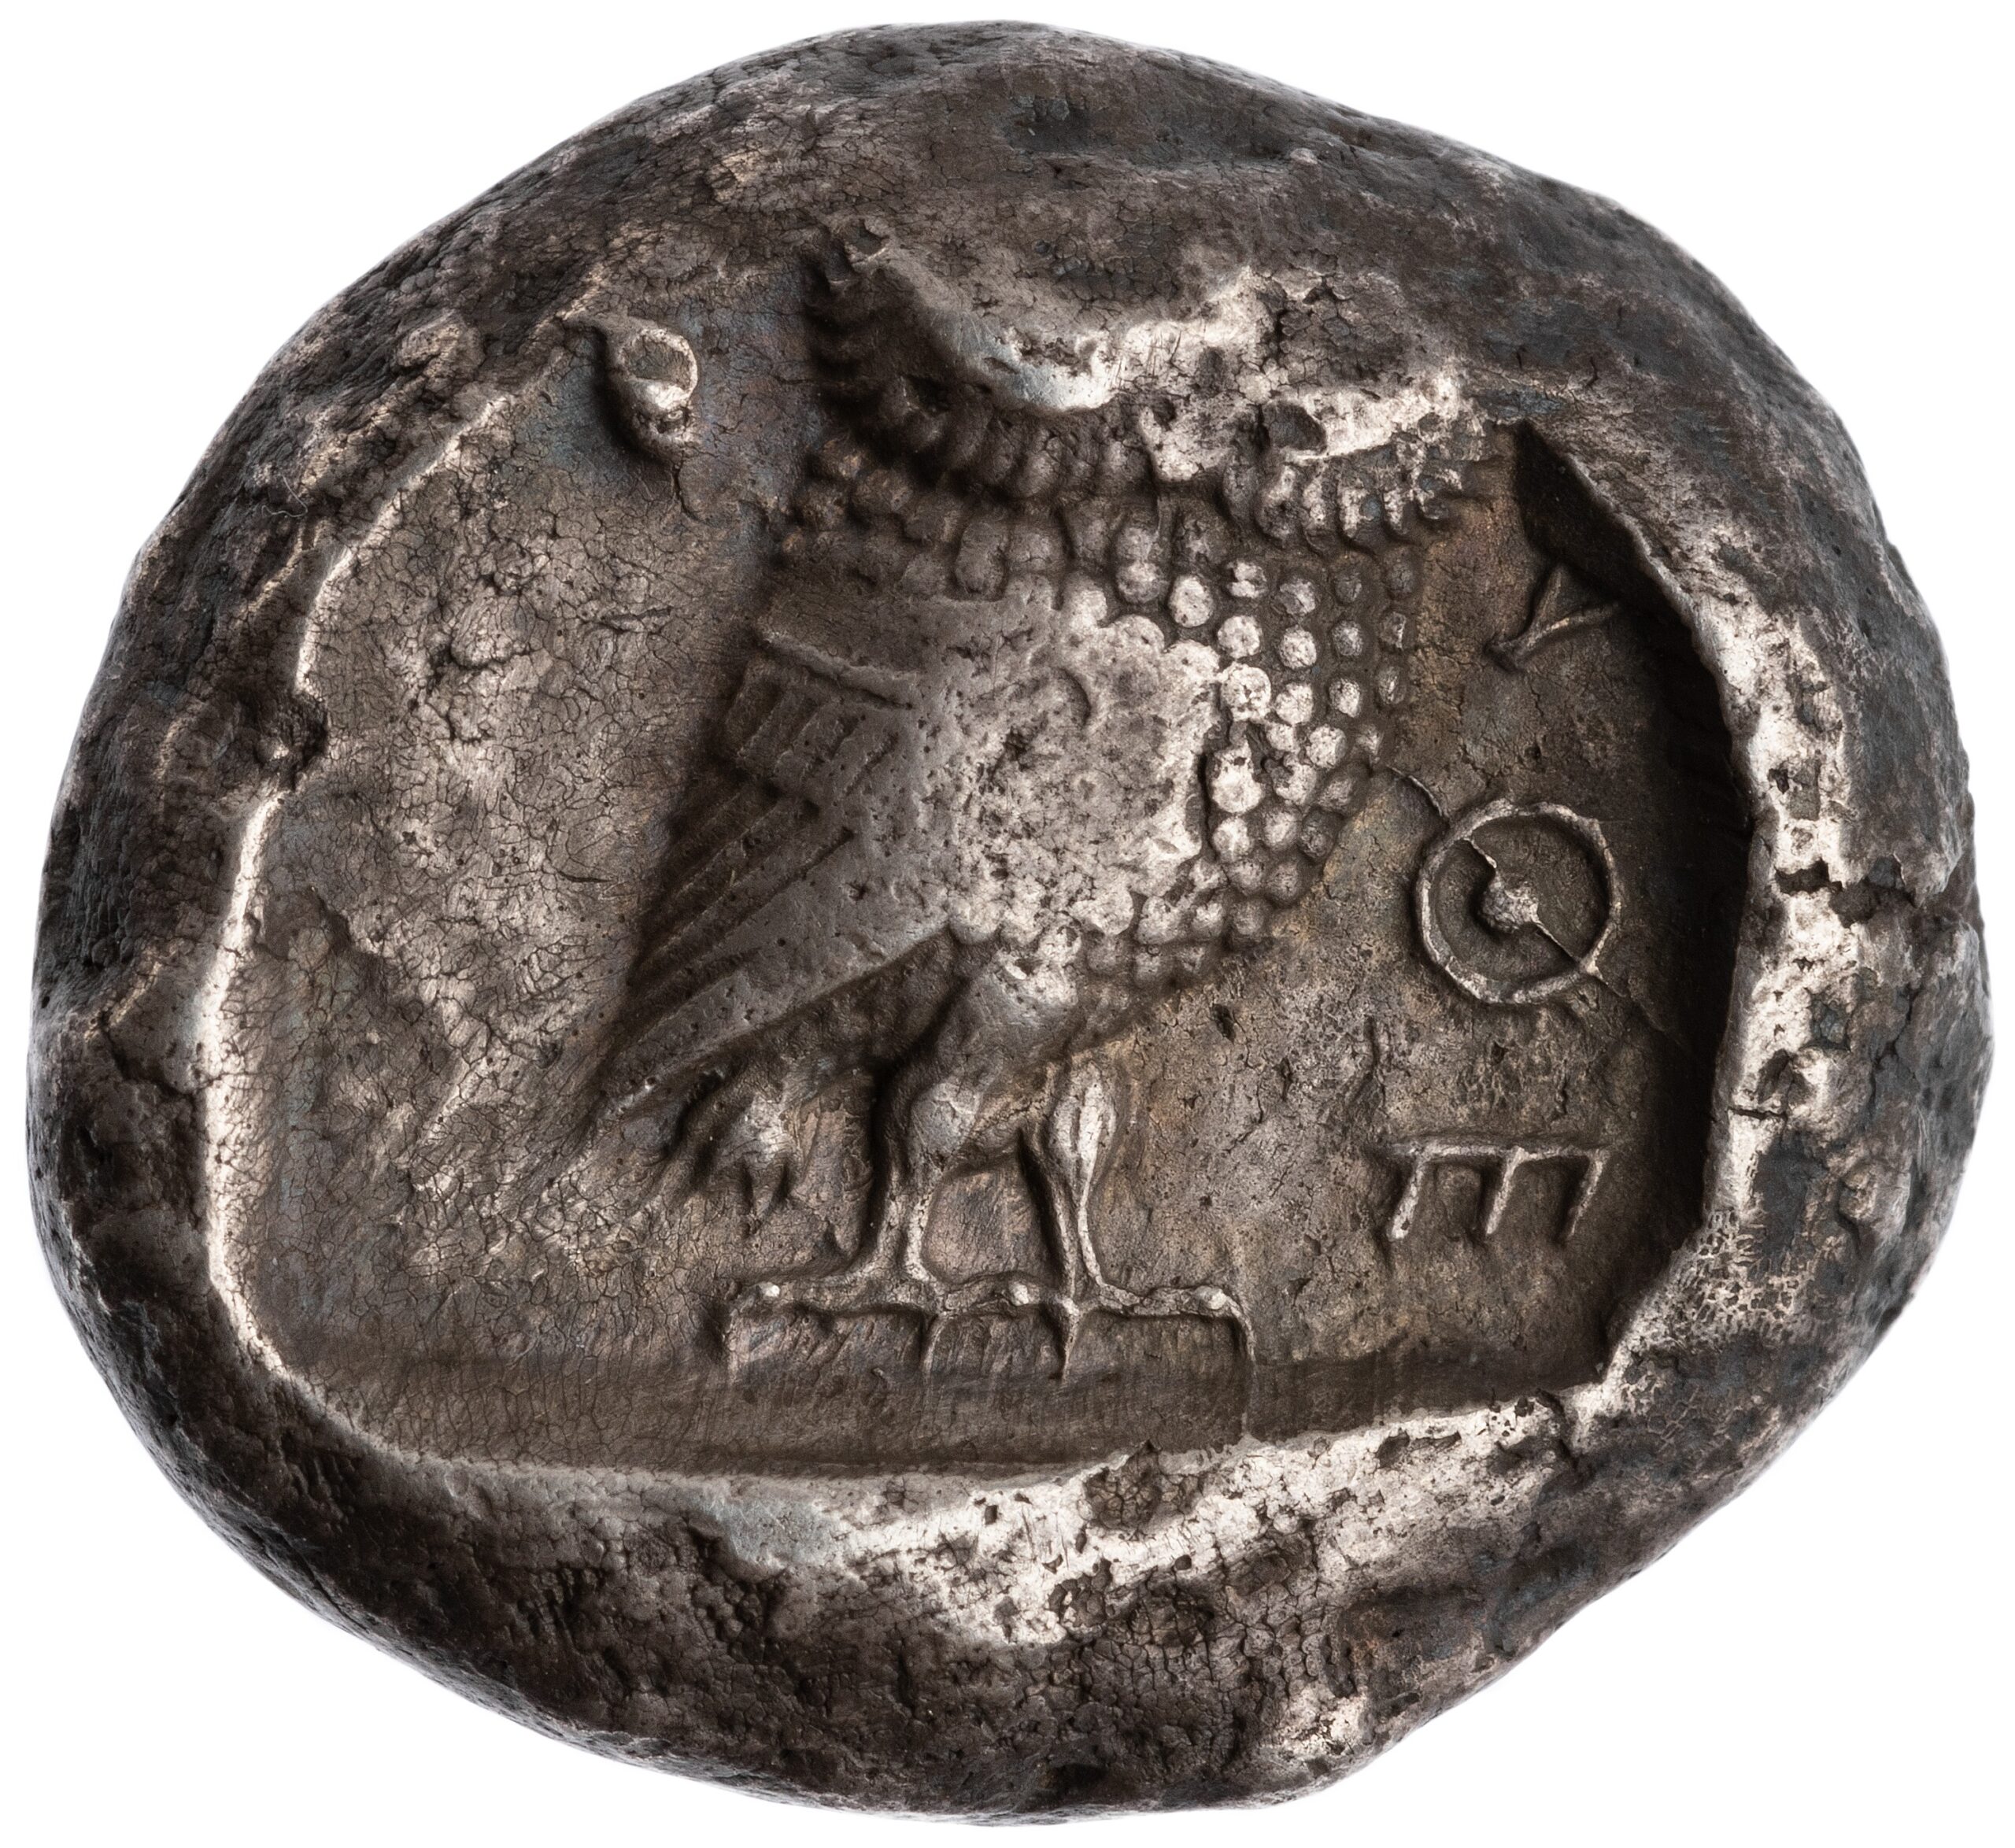 The First Athenian Owls: Symbols of What Exactly?